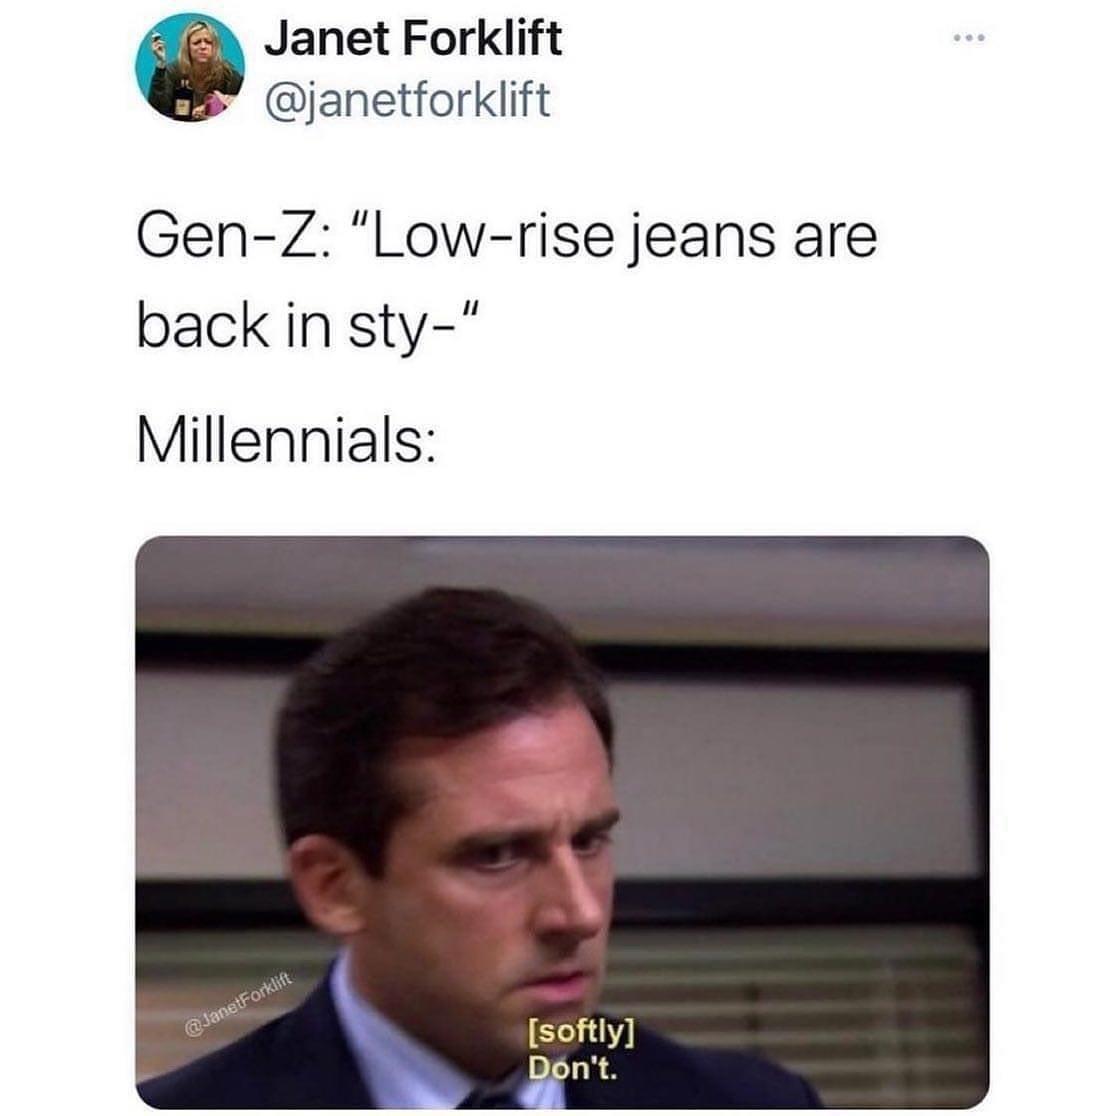 dank memes - low rise jeans office meme - Janet Forklift GenZ "Lowrise jeans are back in sty" Millennials softly Don't. 8